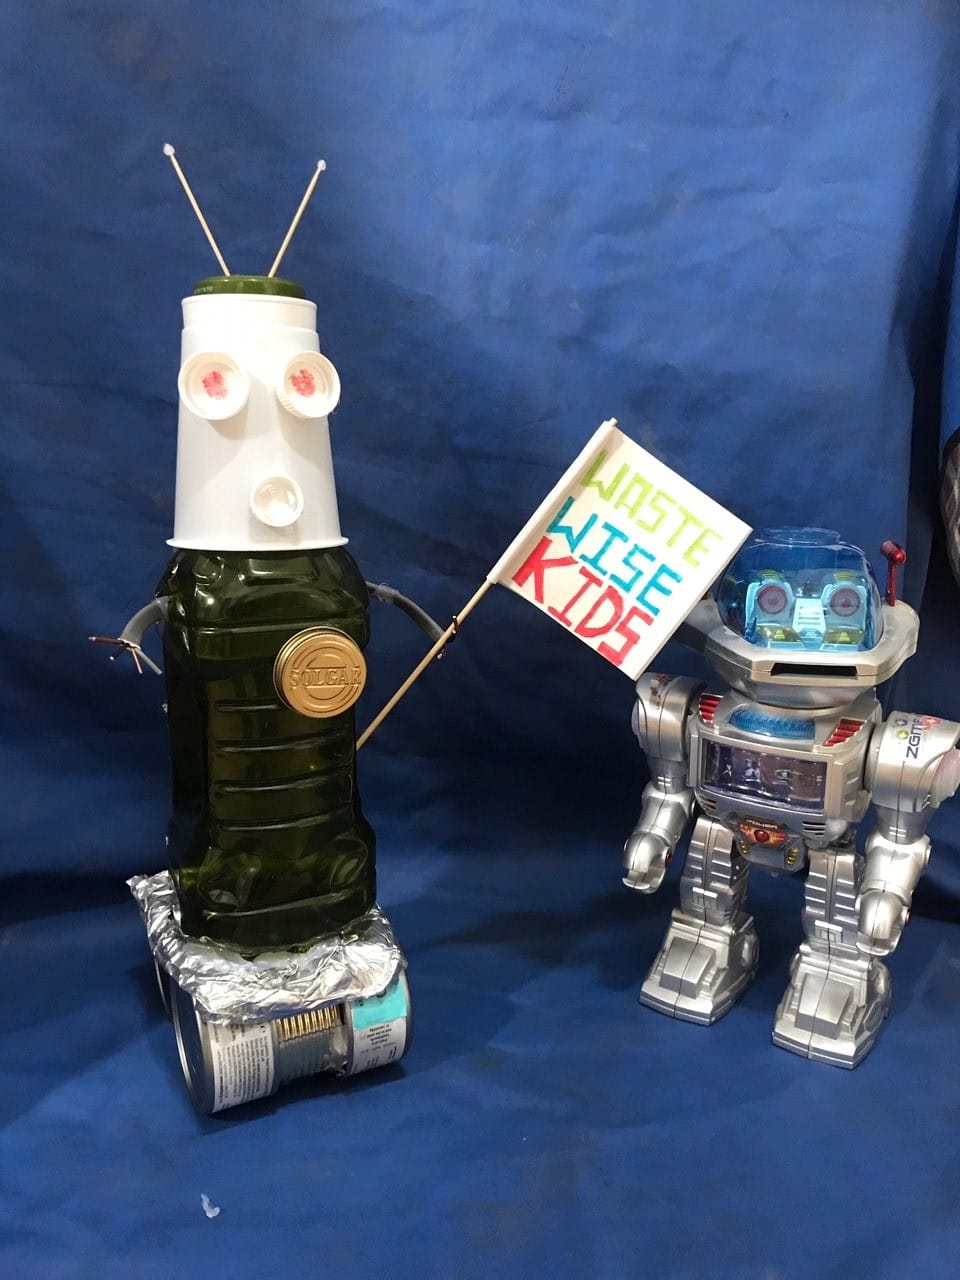 Another Jeff the robot- to keep our WWK Jeff company! Complete with an amazing flag!